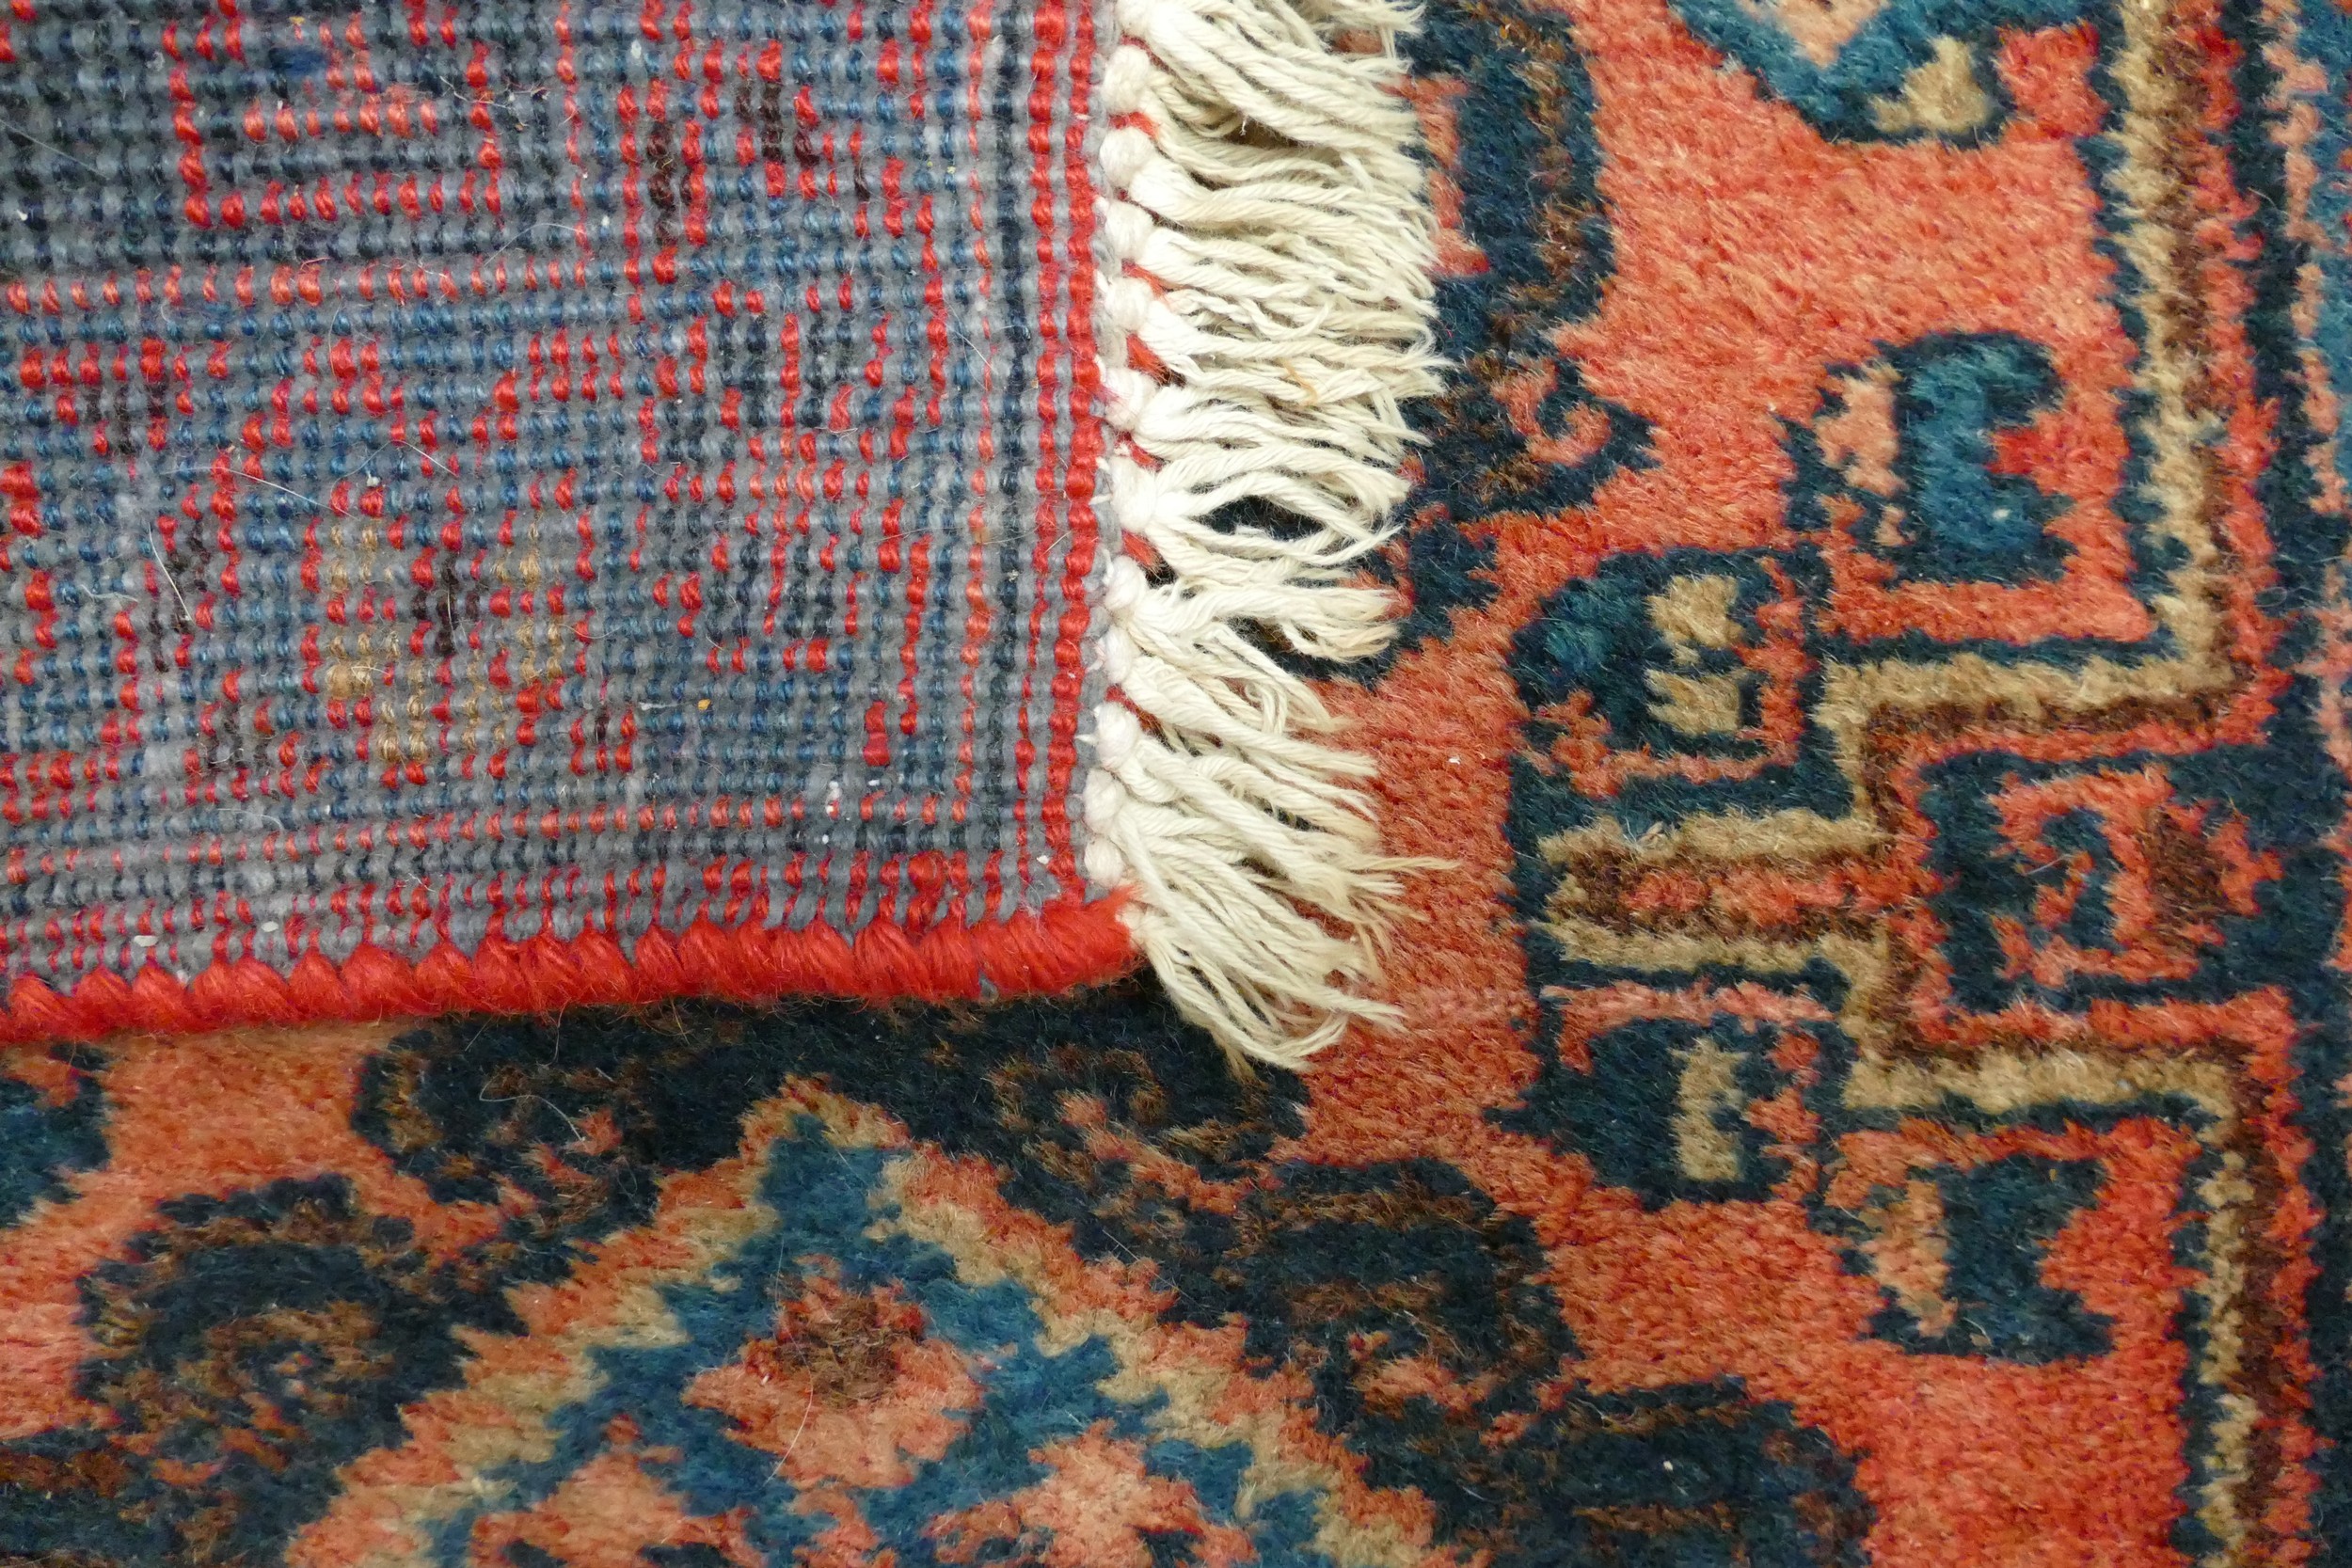 An Eastern Style Five Medallion Pattern Rug in Red and Turquoise Colours. Wear and Fraying Noted. - Image 2 of 2